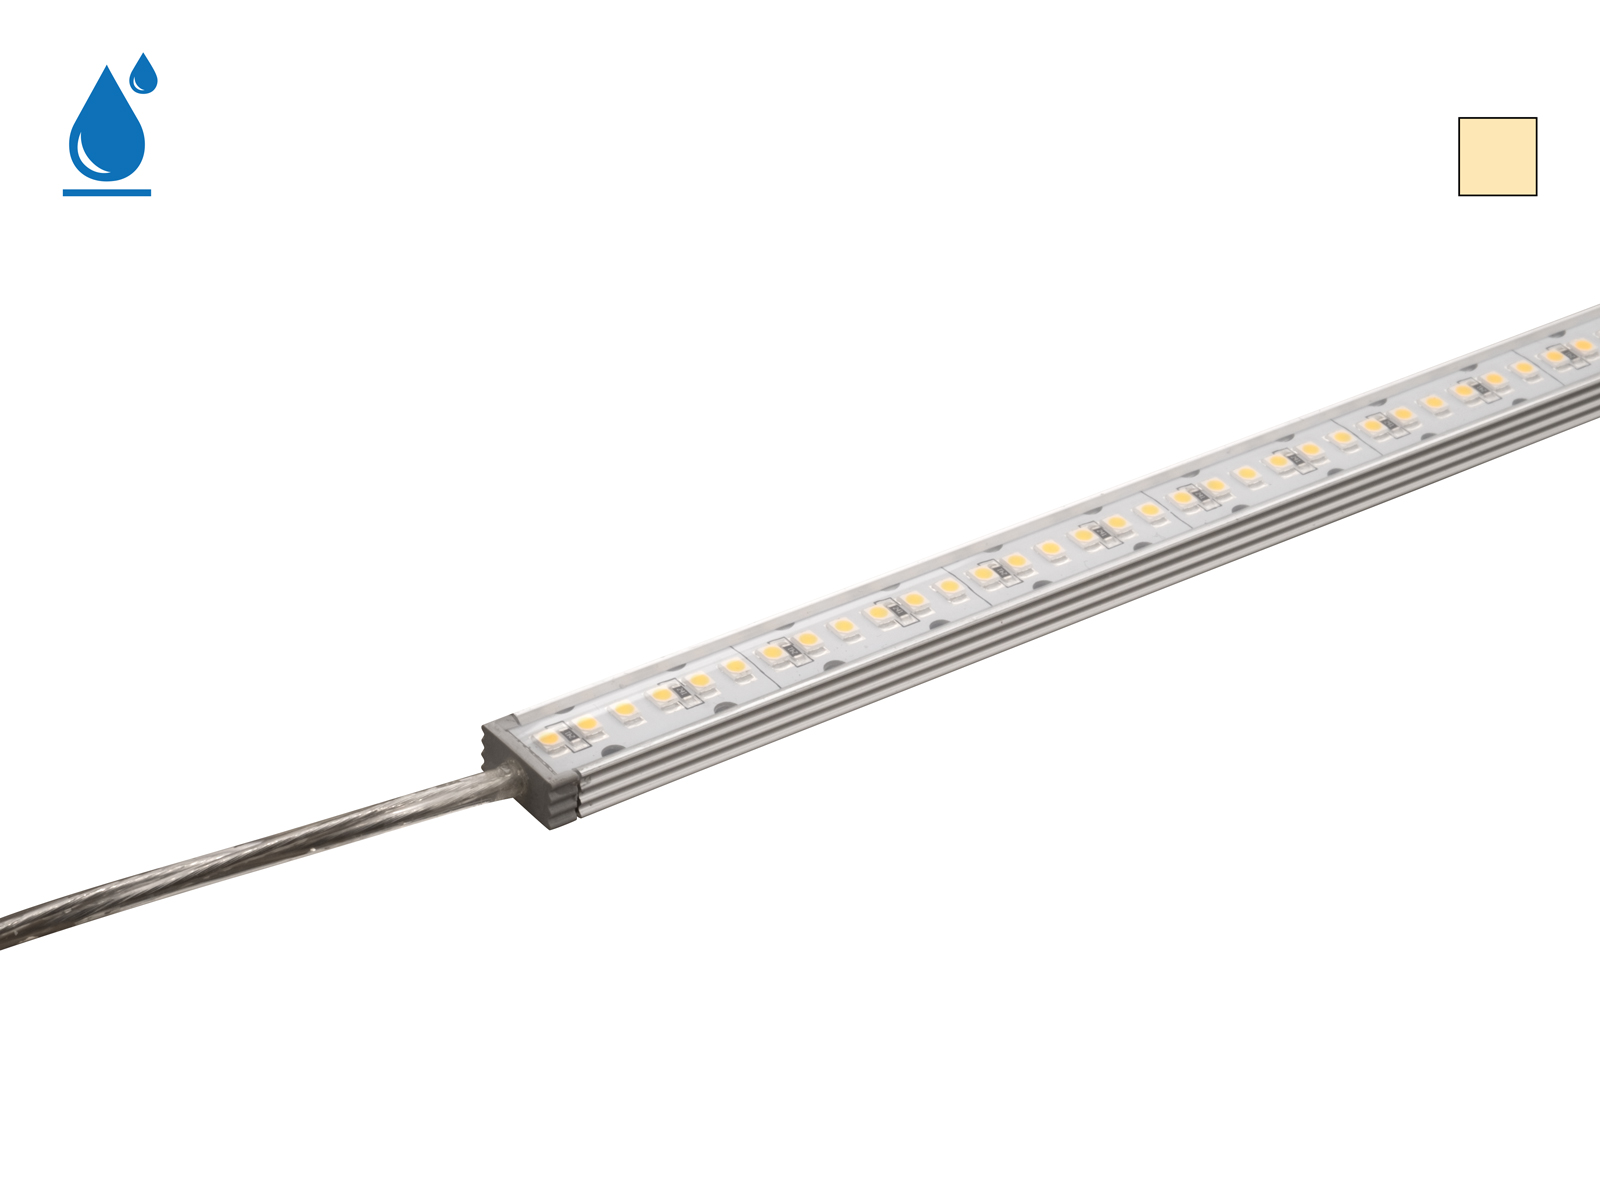 https://www.pur-led.de/out/pictures/master/product/1/lei-120805100_led-leiste_1m_180leds_ip65_warmweiss_1600.jpg